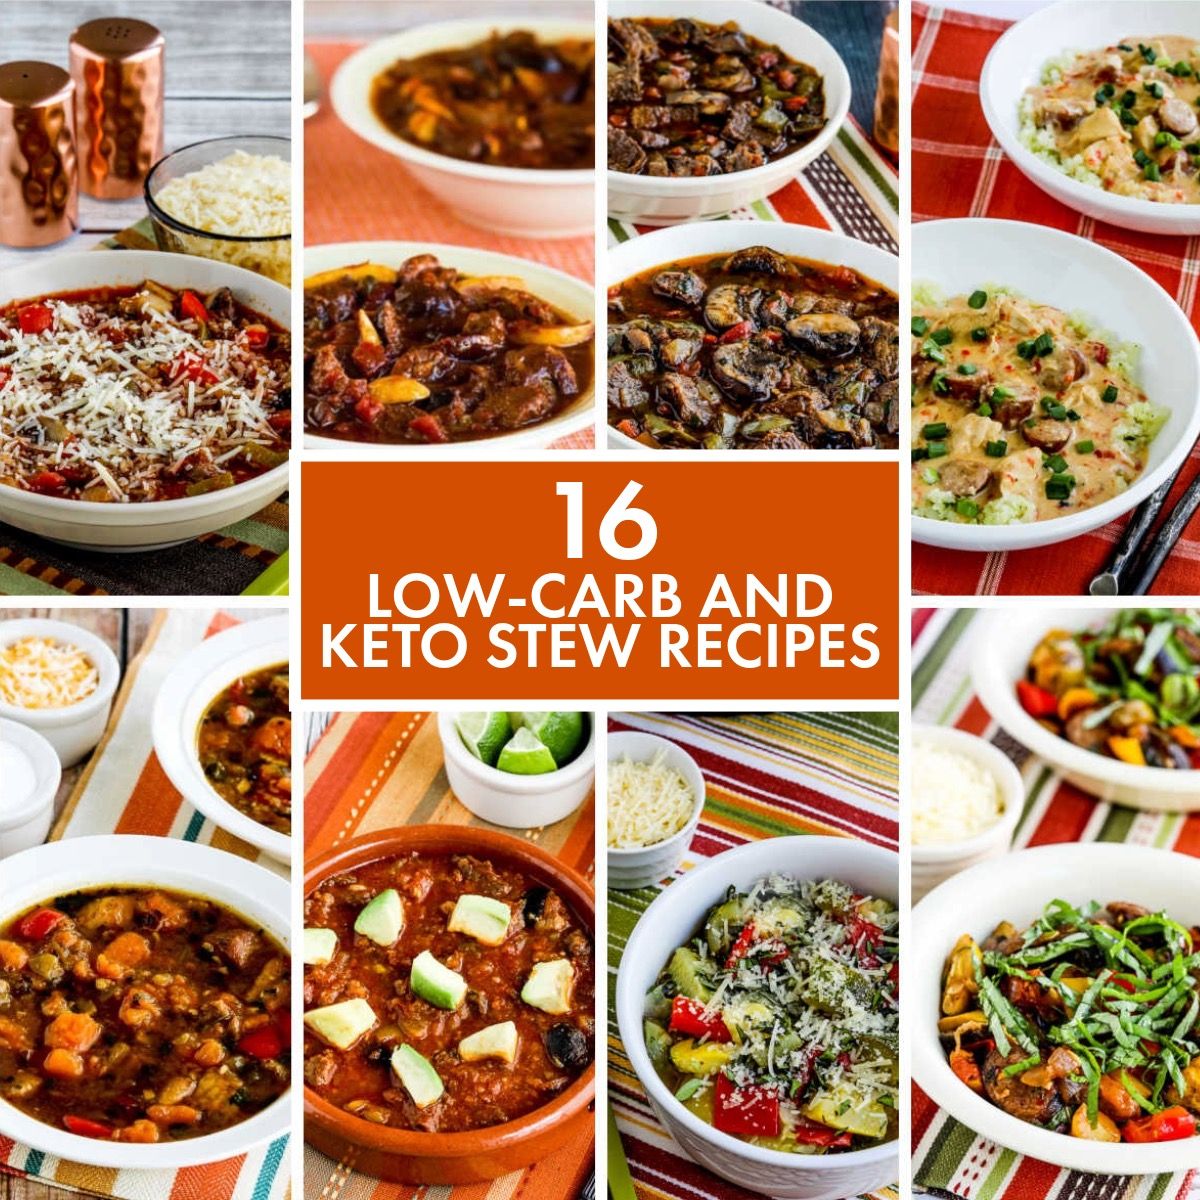 Collage photo for 16 Low-Carb and Keto Stew Recipes, showing featured recipes.